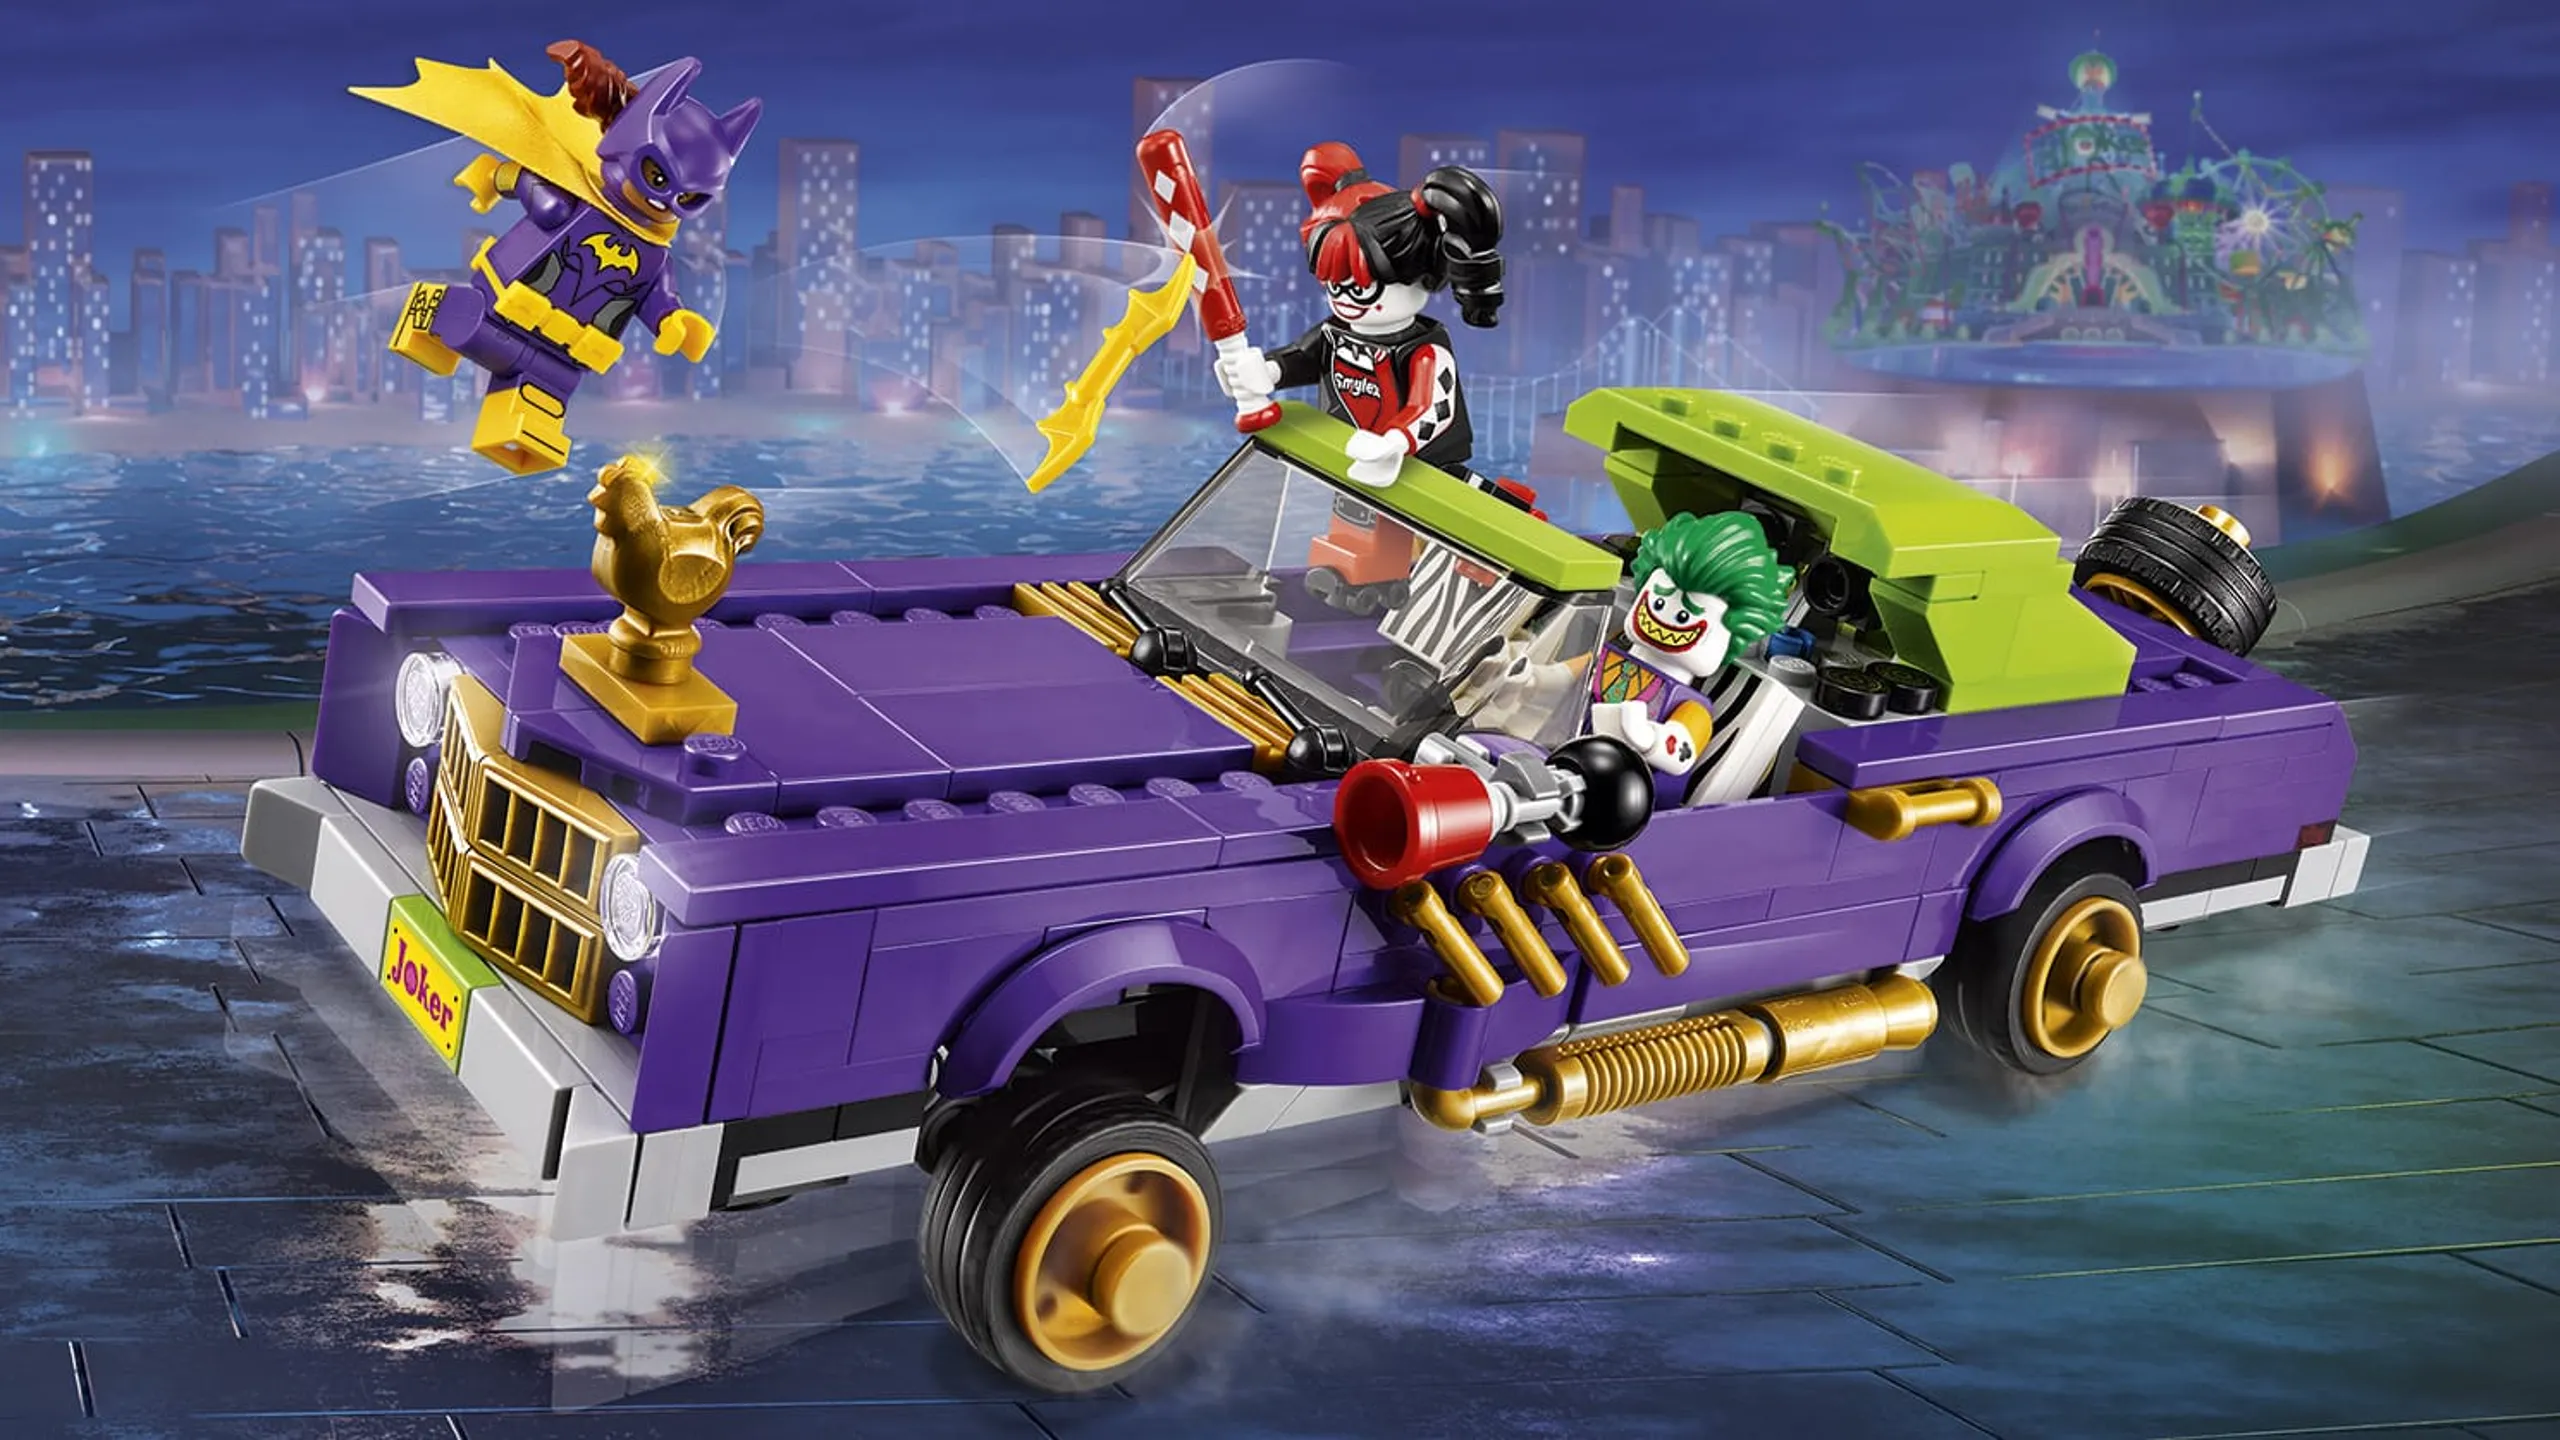 LEGO Batman Movie The Joker Notorious Low Rider - 70906 - Batgirl fights the villains Harley Quinn and the Joker in a crazy purple car around Gotham City.